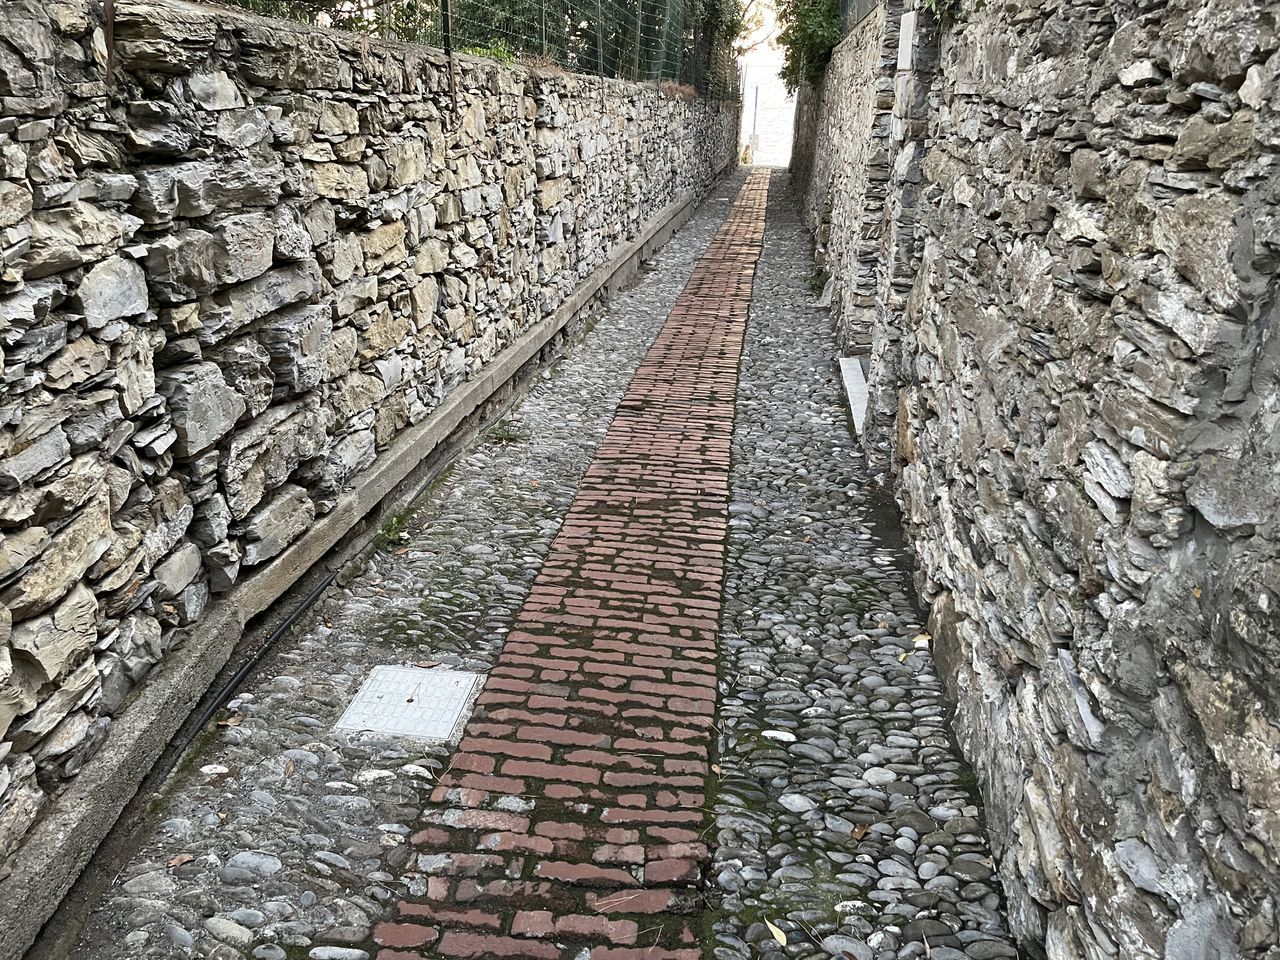 track, wall, the way forward, day, no people, architecture, railroad track, nature, road surface, transportation, walkway, footpath, cobblestone, outdoors, transport, built structure, high angle view, rubble, stone, rail transportation, plant, diminishing perspective, gravel, stone wall, tree, rock, wall - building feature, street